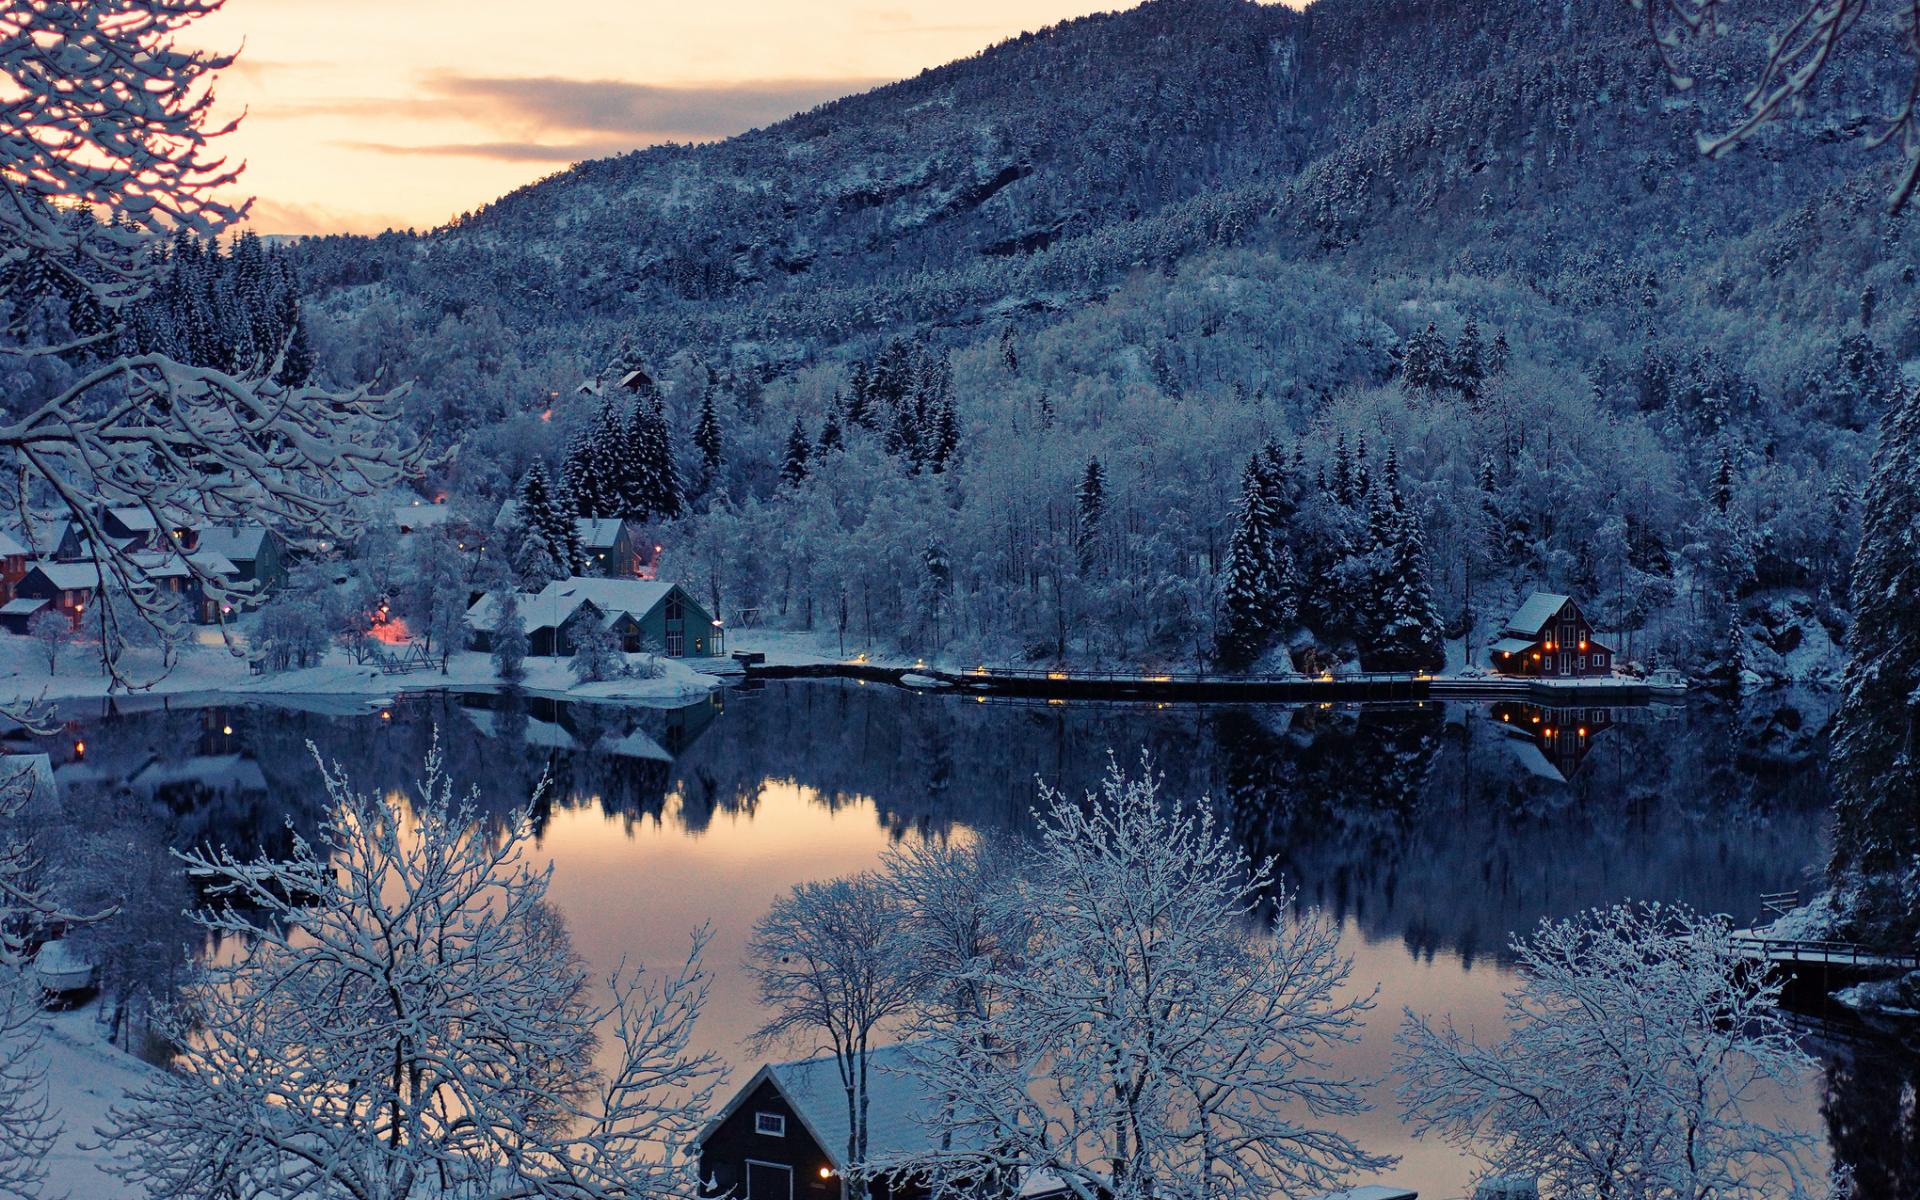 norway, Nature, Landscapes, Lakes, Water, Reflection, Hills, Mountains, Trees, Forest, Sunset, Sunrise, Scenic, Winter, Snow, Seasons, Architecture, Buildings, Houses, Resort, Lights Wallpaper